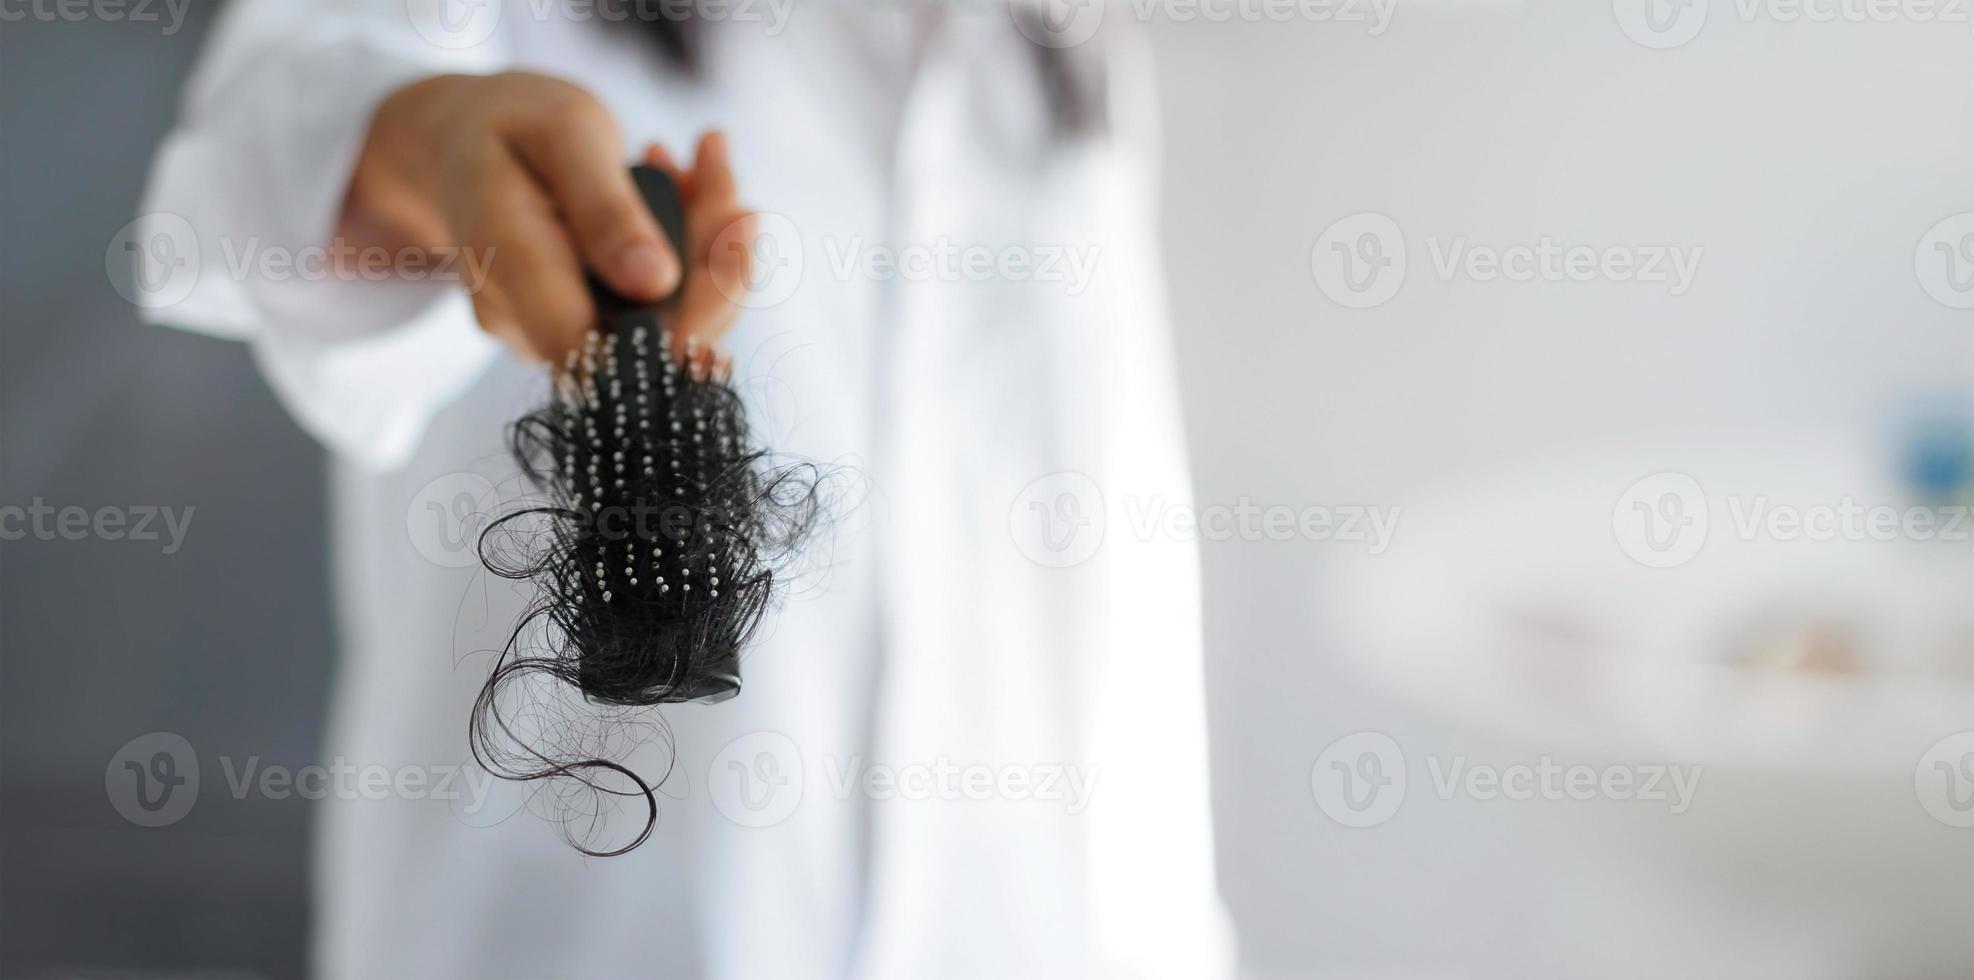 woman losing hair on hairbrush in hand, soft focus photo